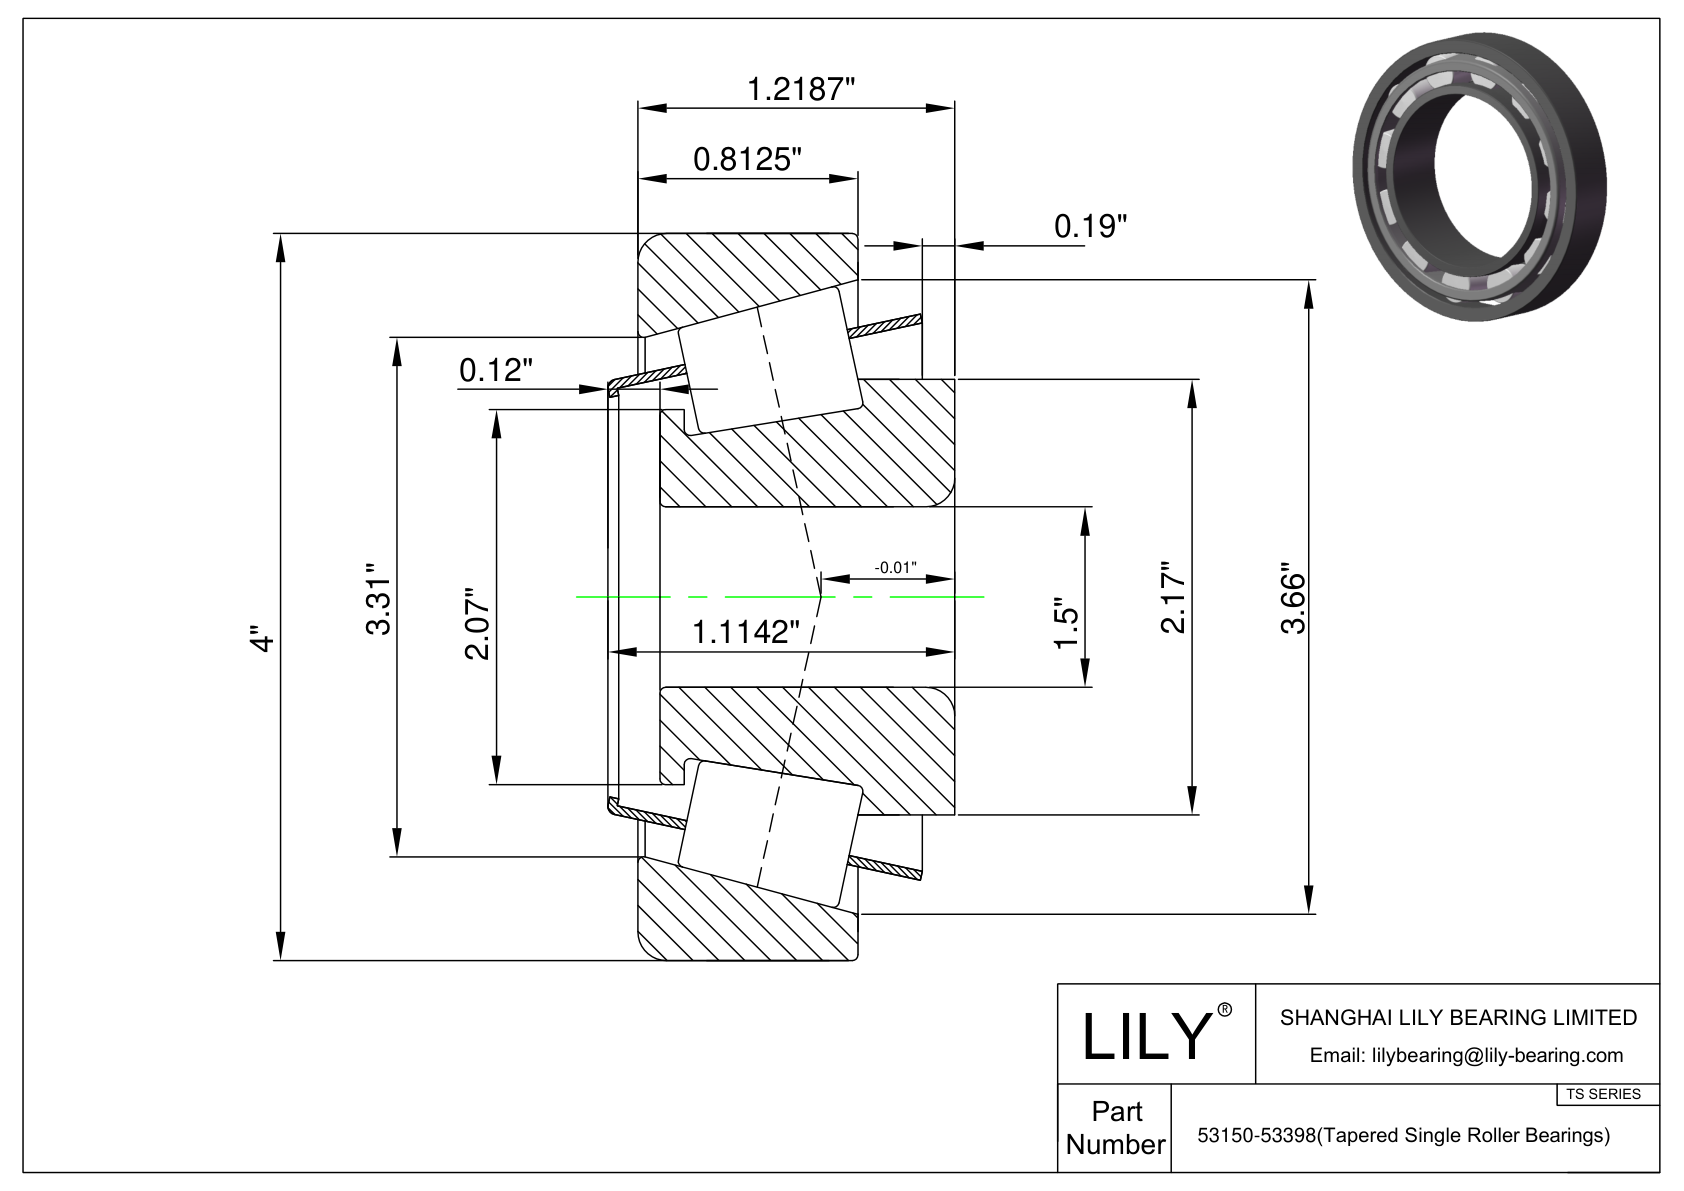 53150-53398 TS (Tapered Single Roller Bearings) (Imperial) cad drawing